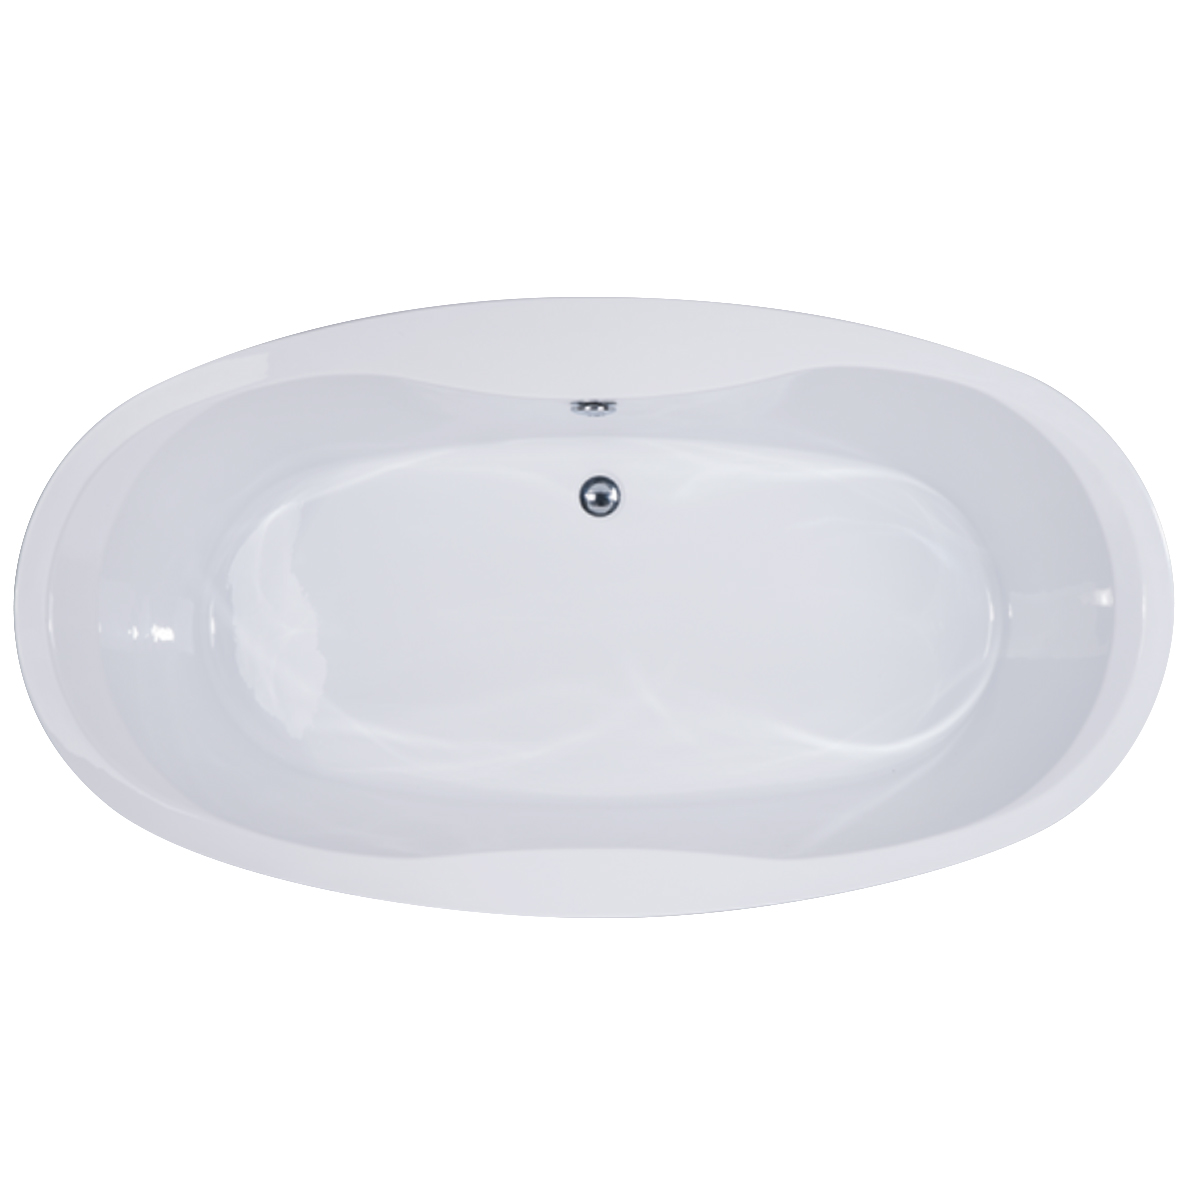 DST-FSOCB02 Free Standing Oval Tub Top View